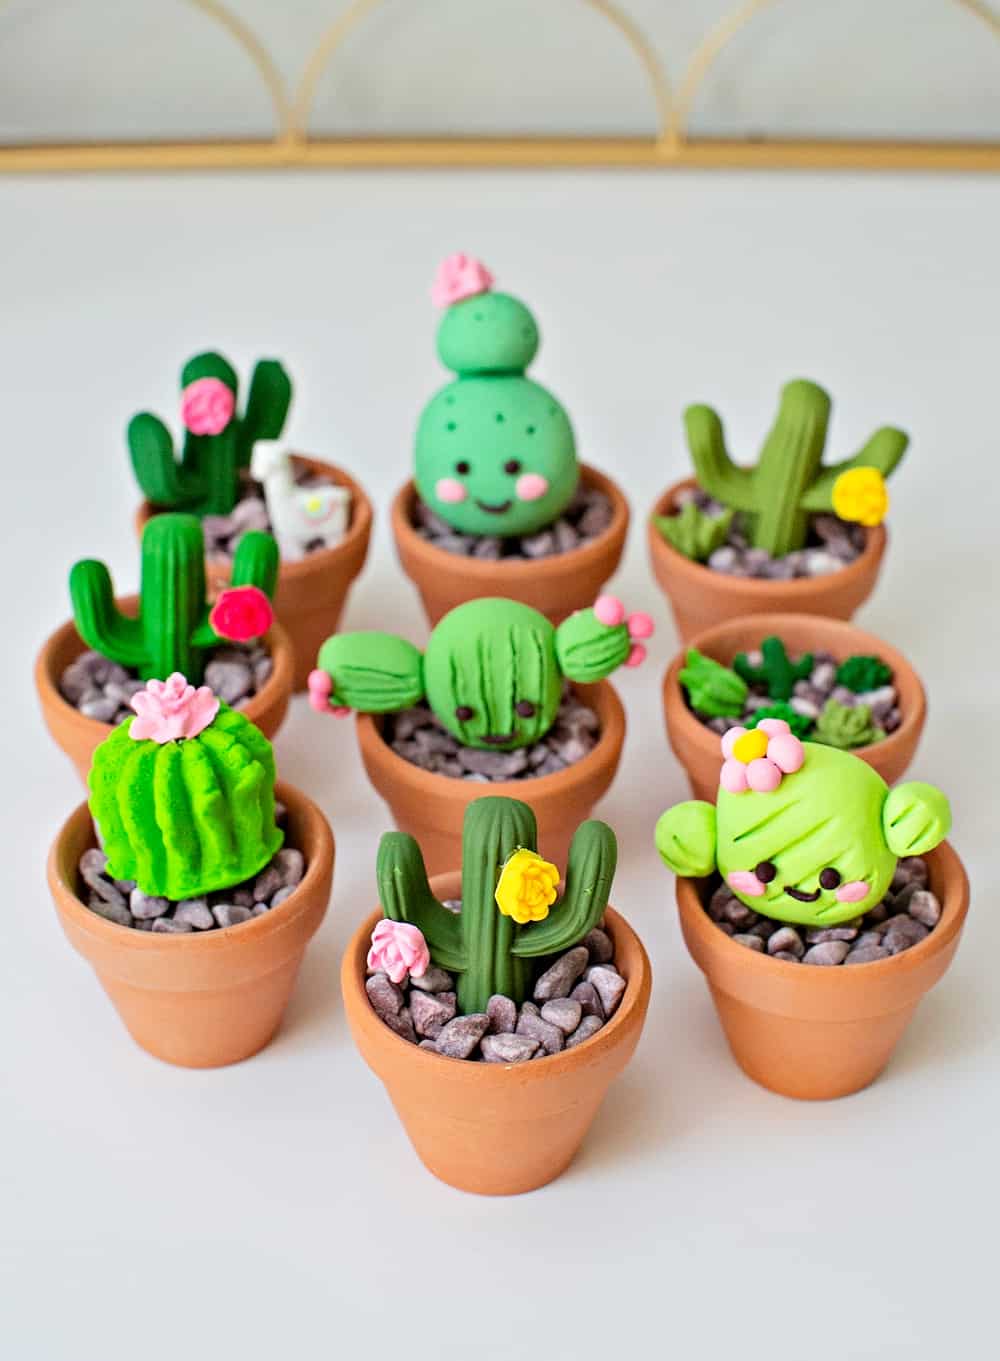 DIY Clay Cactus Craft - Cute Polymer Craft for Kids